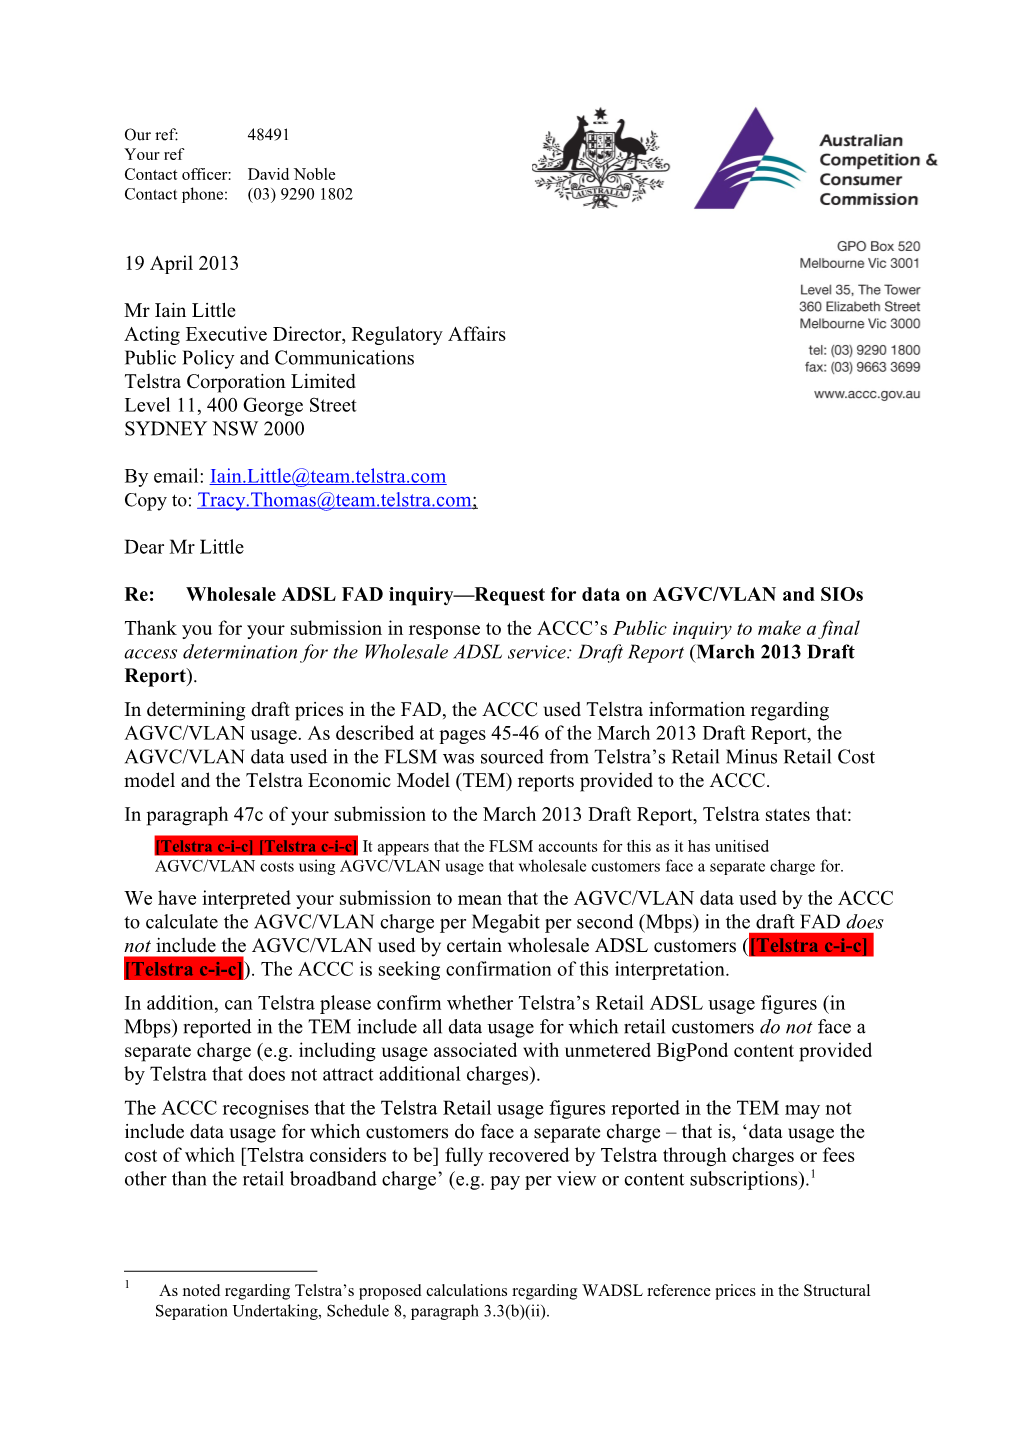 ACCC Letter to Telstra Seeking Information on AGVC/VLAN and Sios